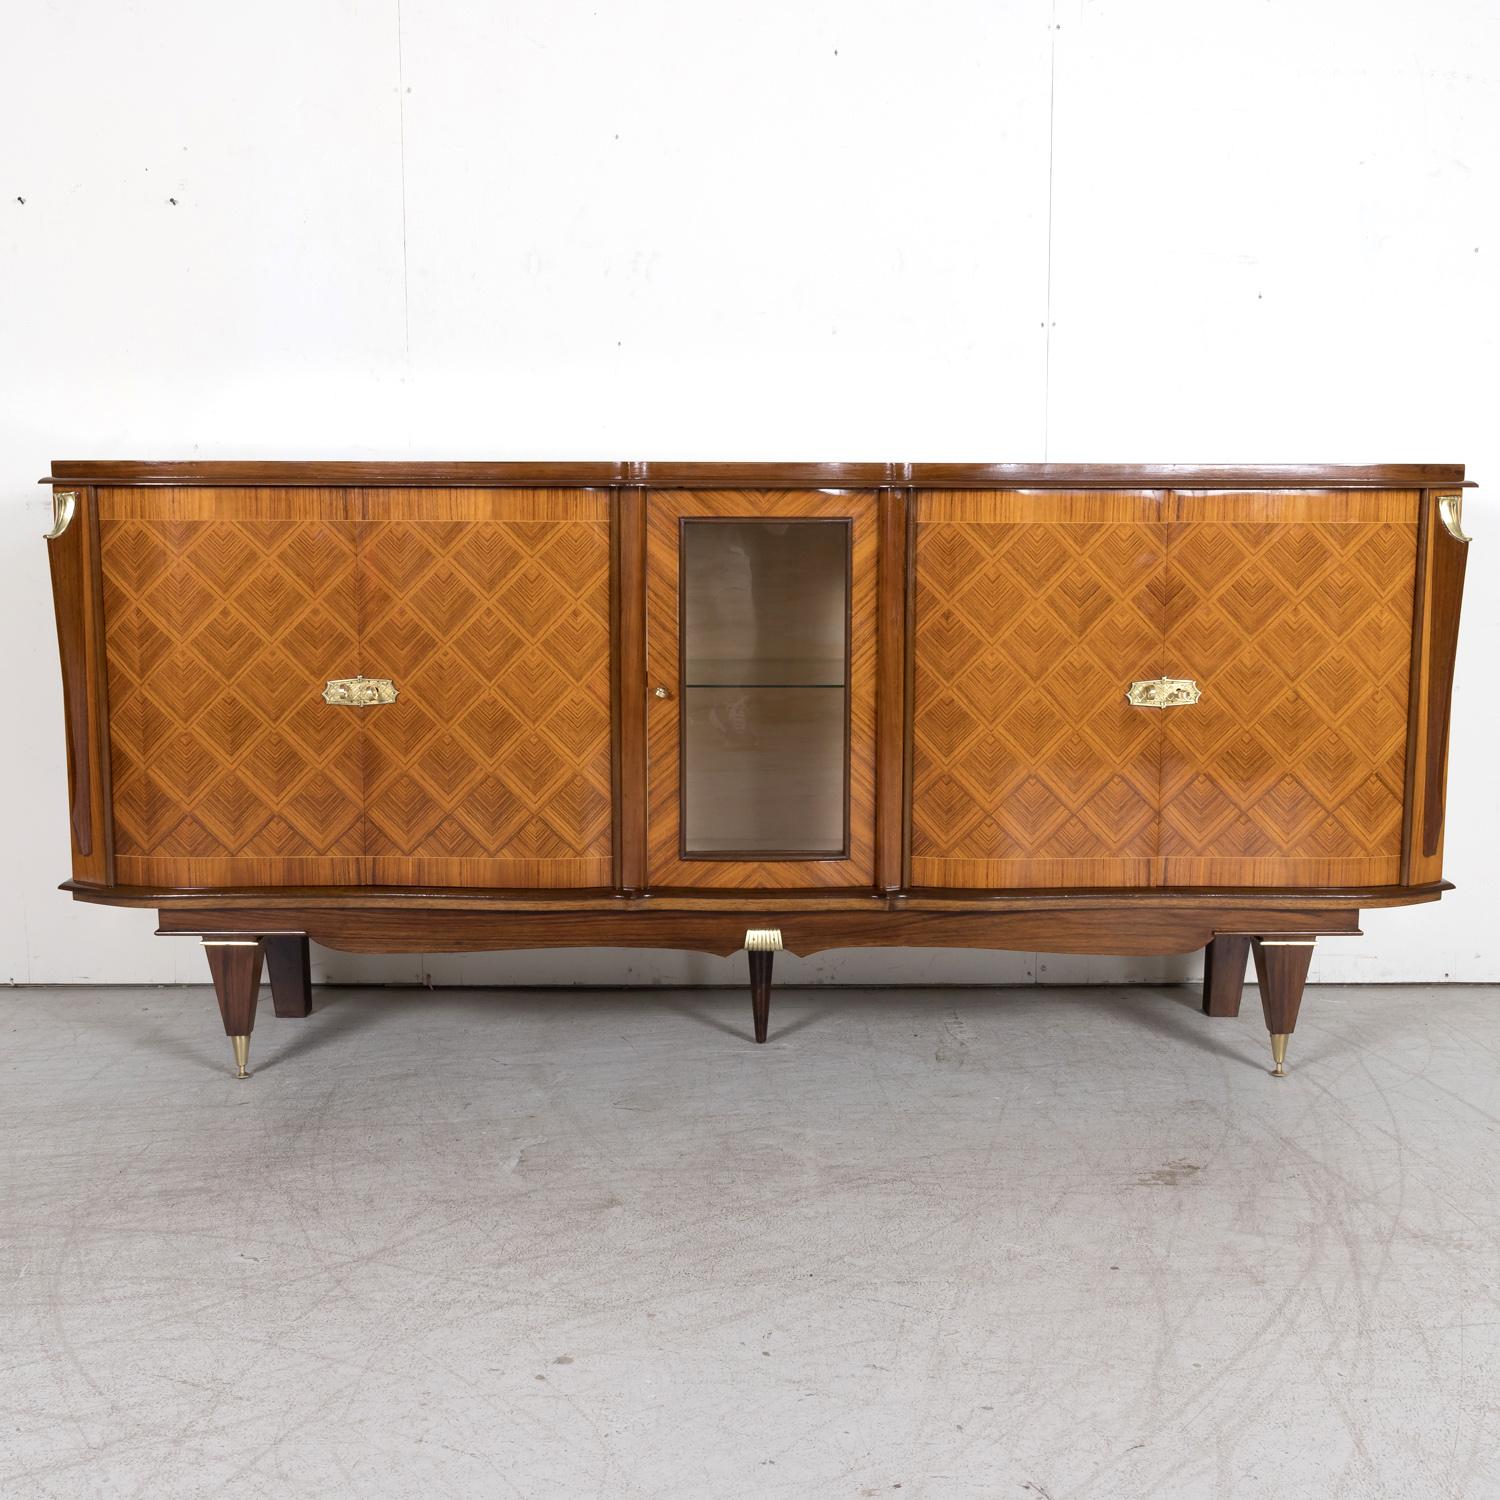 A stunning French Art Deco enfilade buffet or sideboard handcrafted of mahogany near Toulouse, the capital of France’s southern Occitanie region, with a stunning wood grain, rich patterned palisander parquetry, and bronze doré that accents the wood